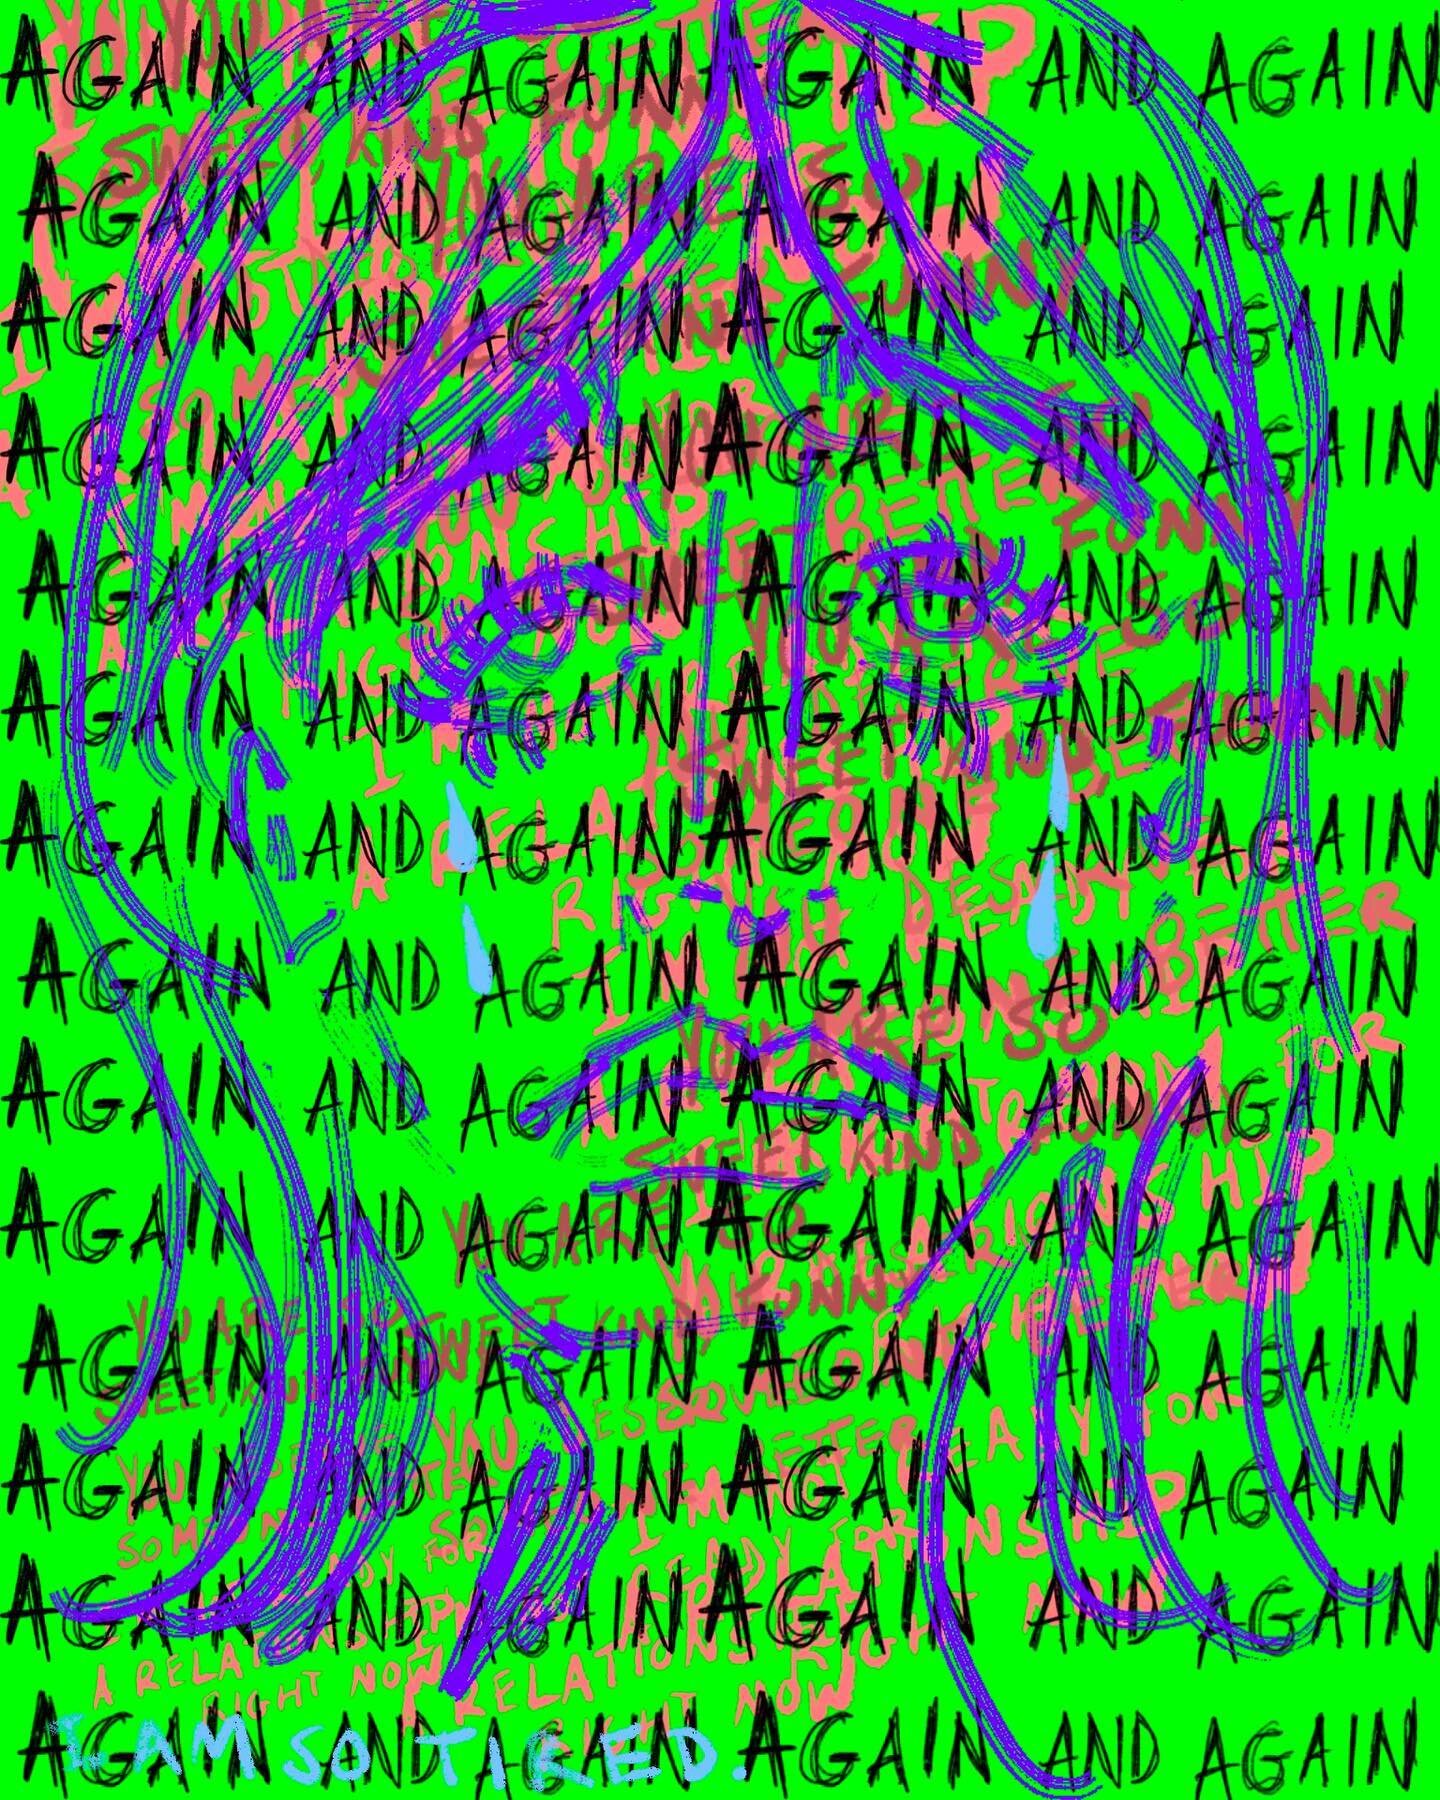 &ldquo;againandagainandagain (exhaustion)&rdquo;, digital print

All sizes are available, starting at $15 💸

Free shipping available + pick up in NYC 🗽

Thank you for supporting my art! :) ❤️
.
.
.
.
.
.
.
.
.
.
.
.
#art #visualart #artwork #digita